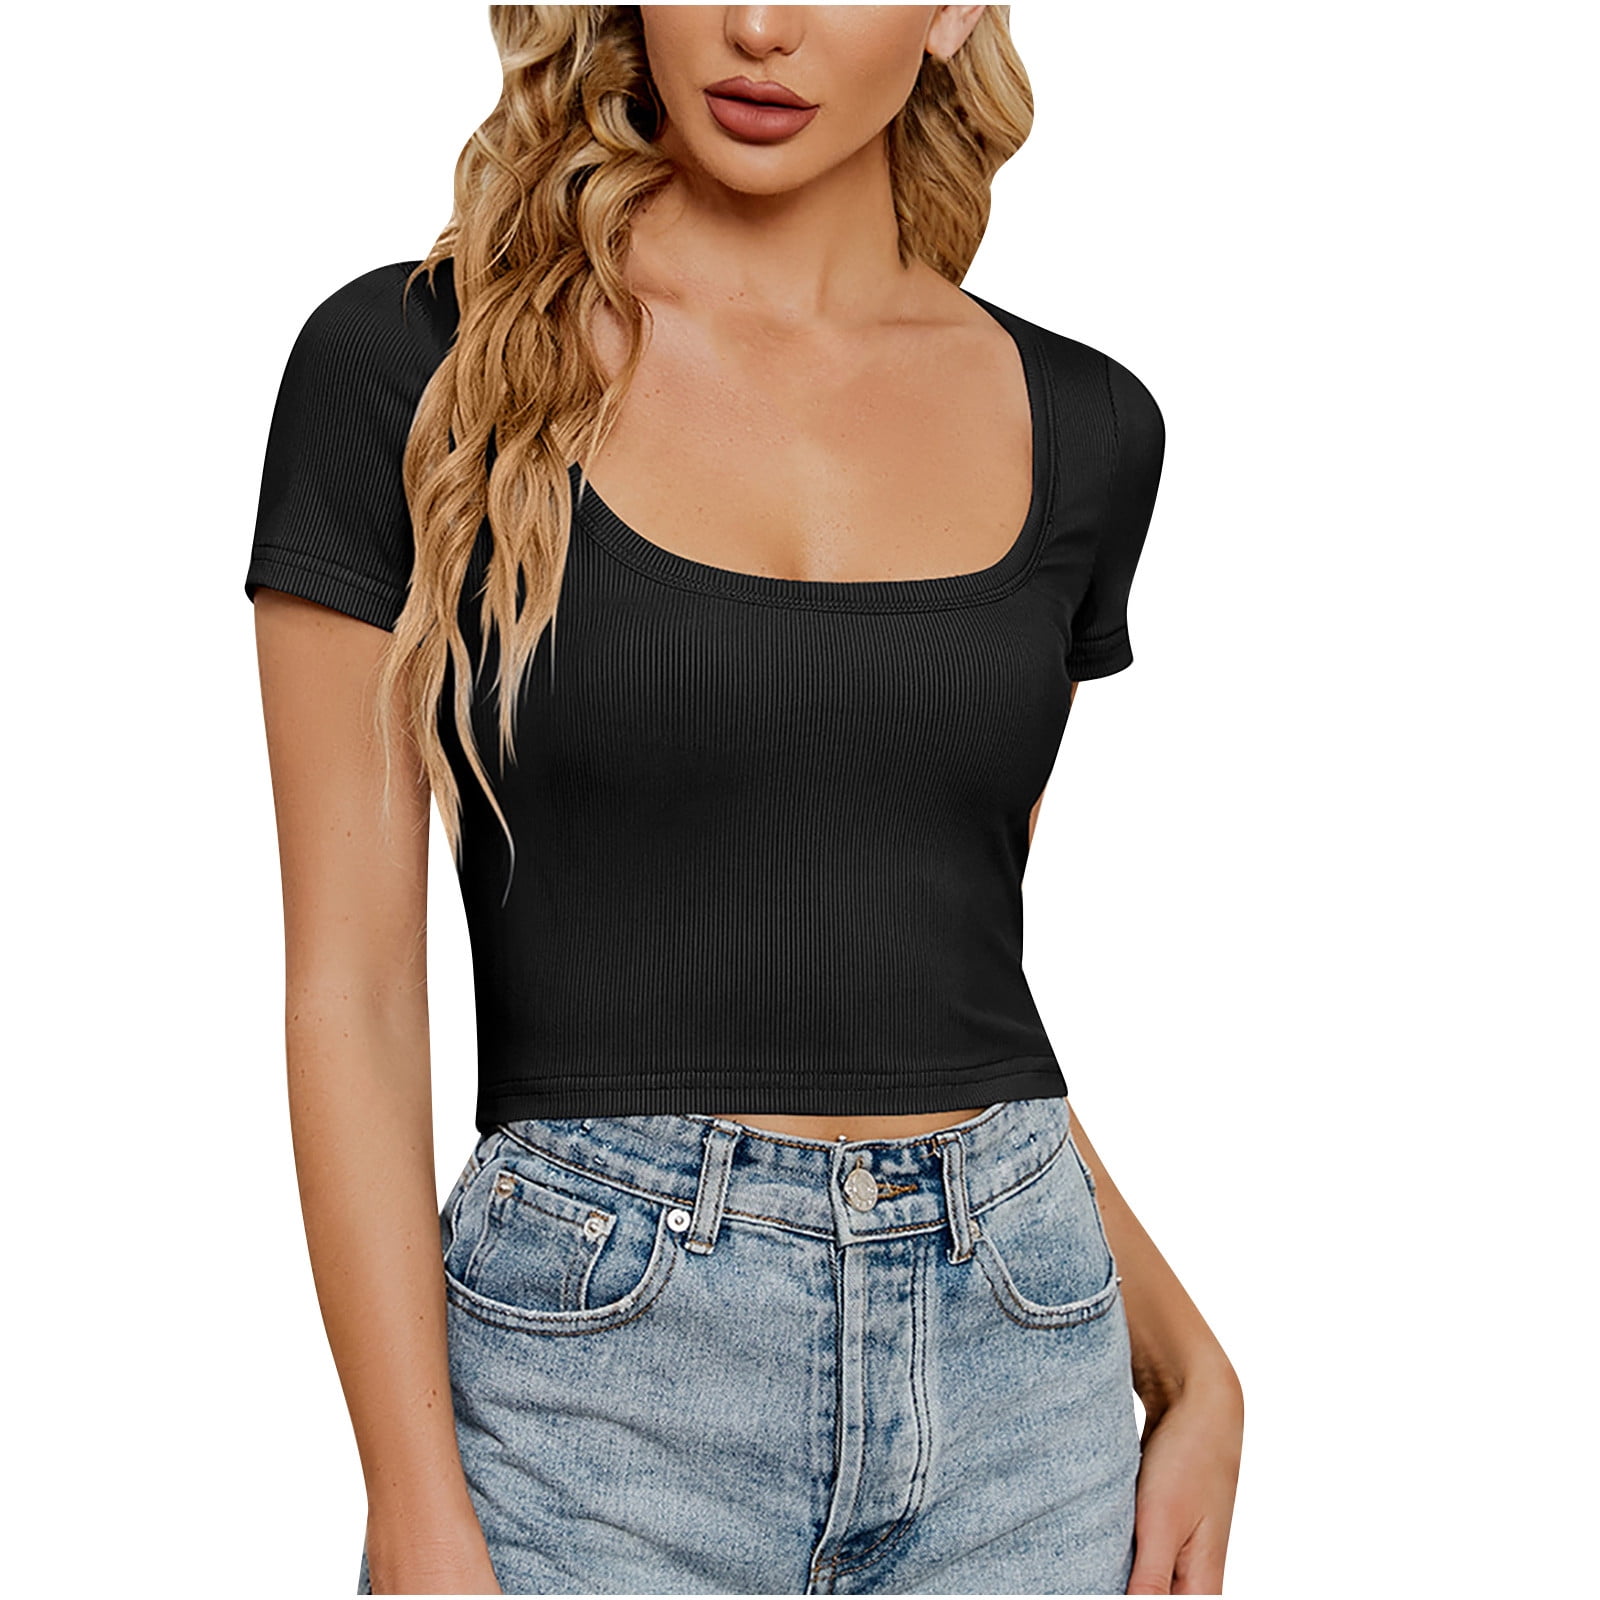 RYRJJ Women's Short Sleeve Crop Tops Square Neck Cropped T Shirts Y2K  Streetwear Sexy Slim Fit Ribbed Knit Basic Tees(Black,S)